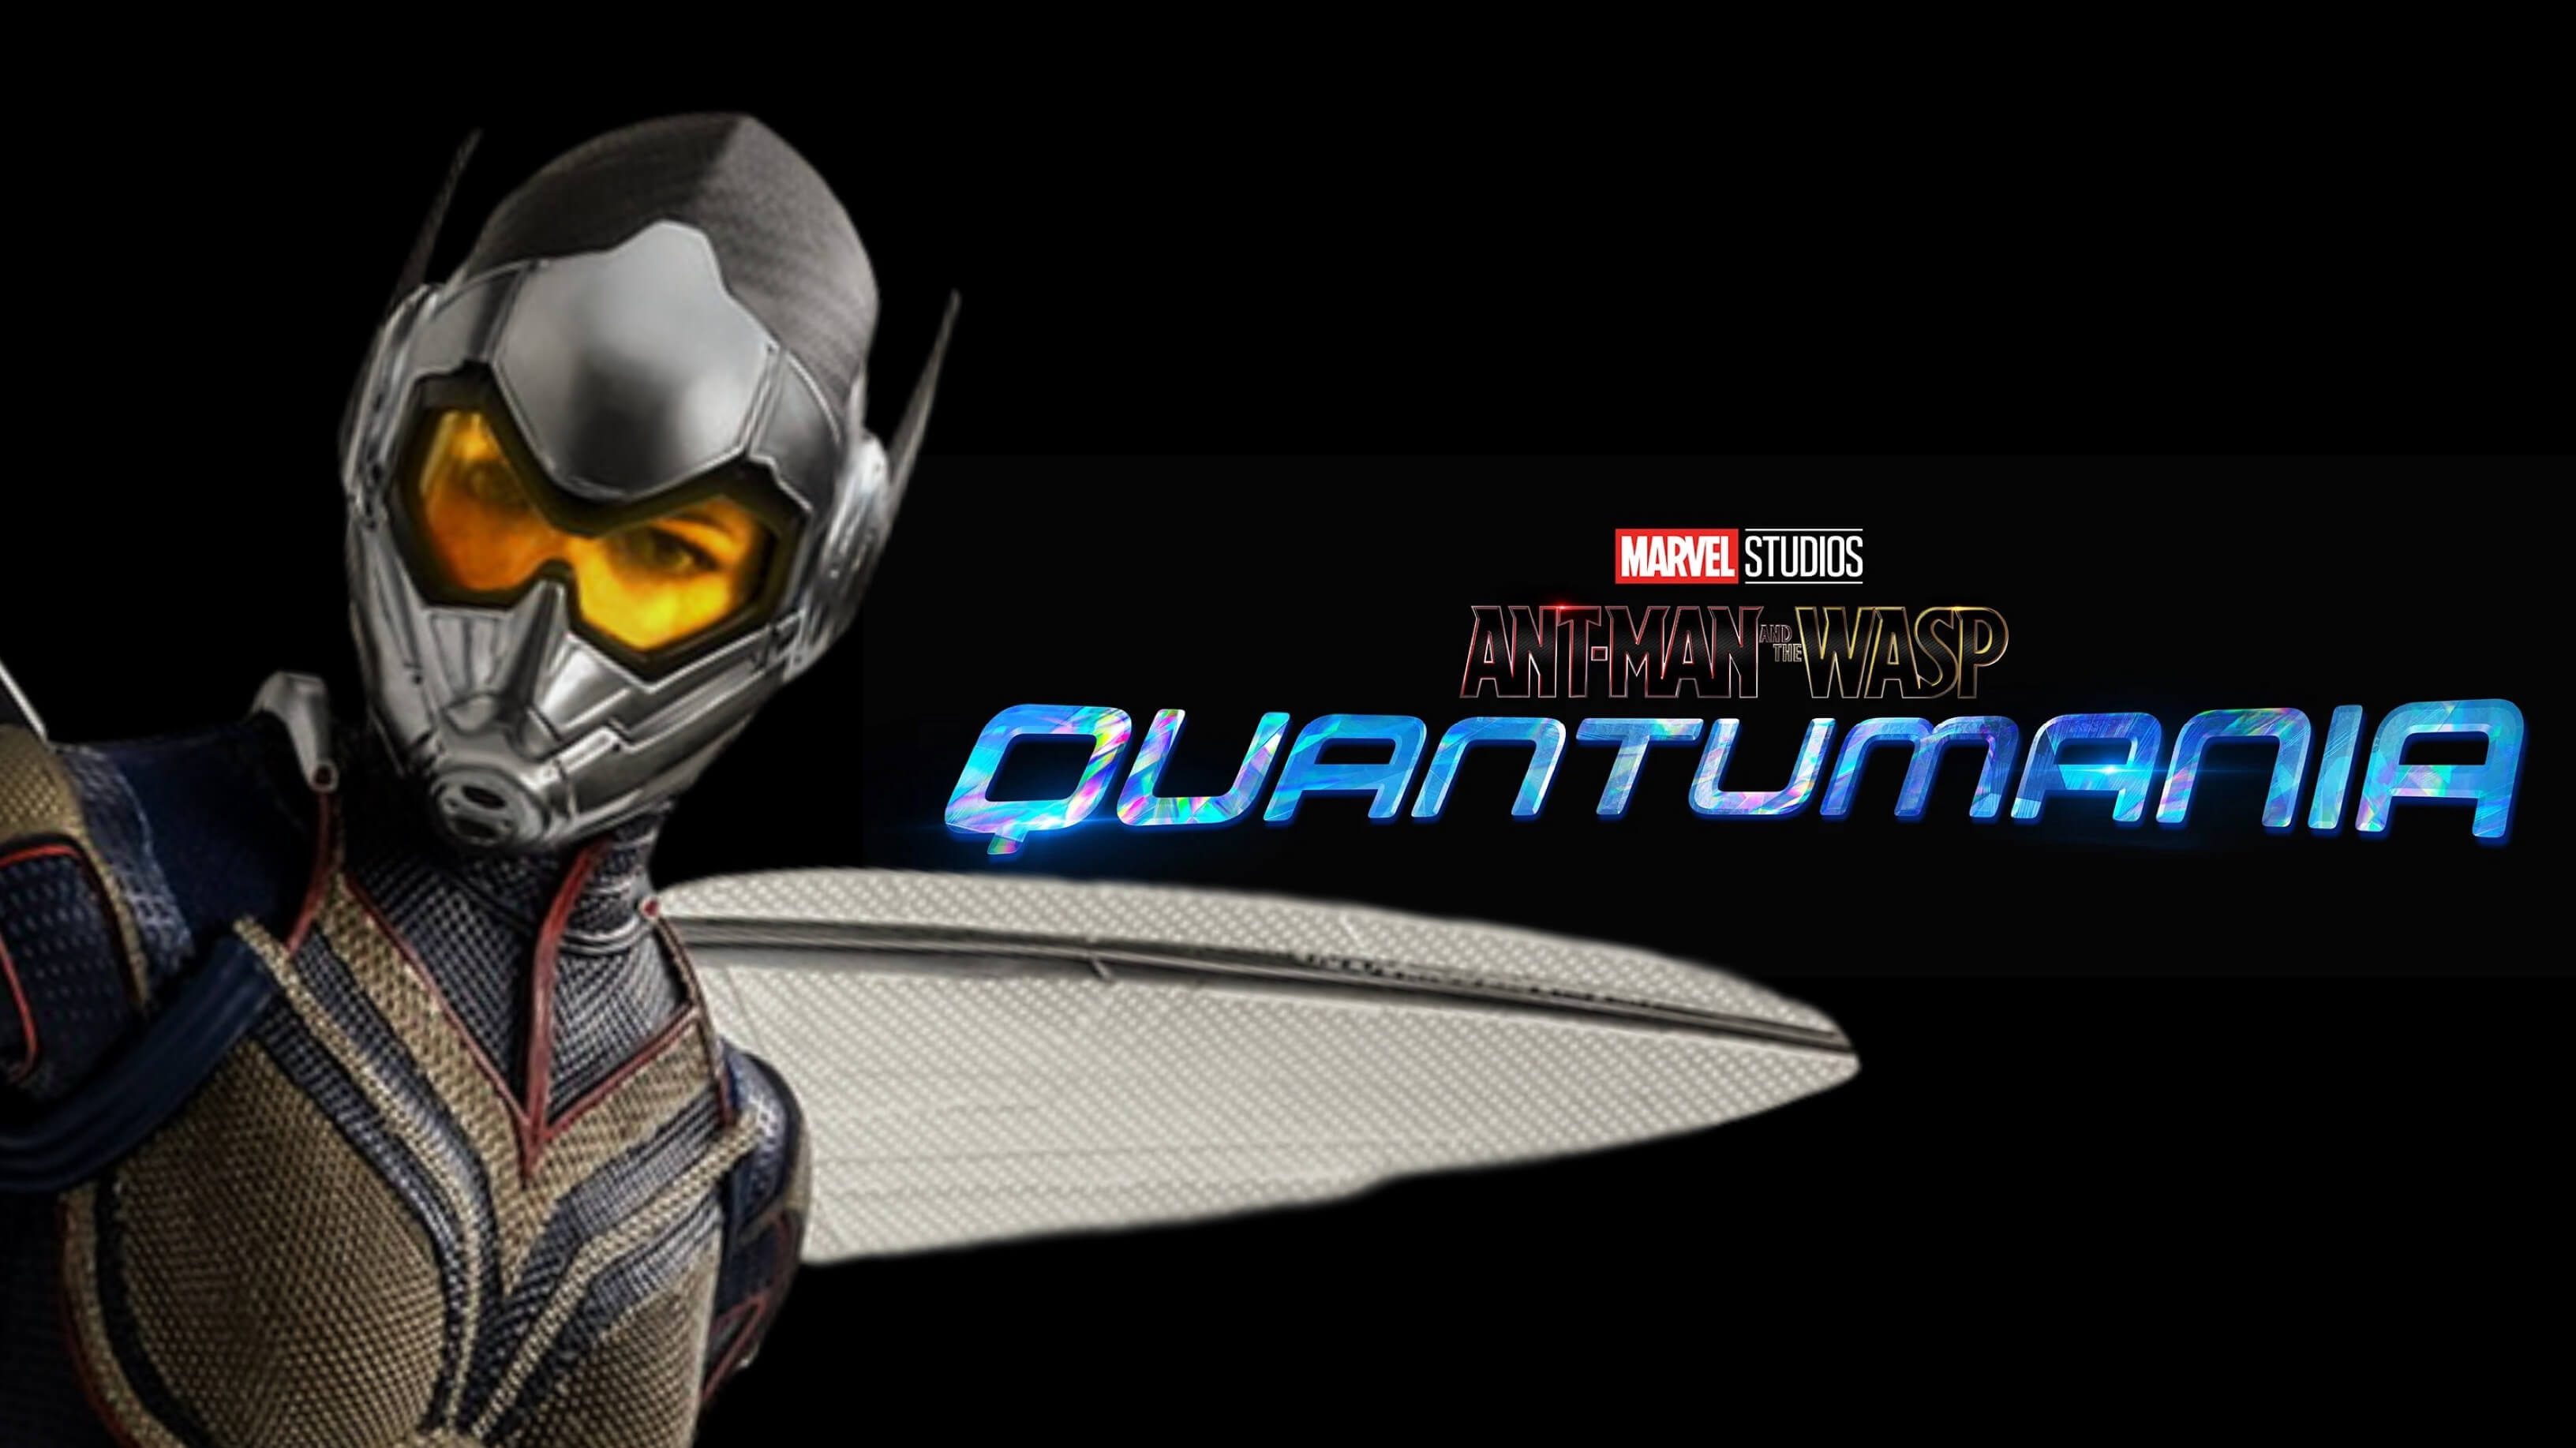 Evangeline Lilly Confirms Summer Start Date For ‘Ant-Man And The Wasp: Quantumania’